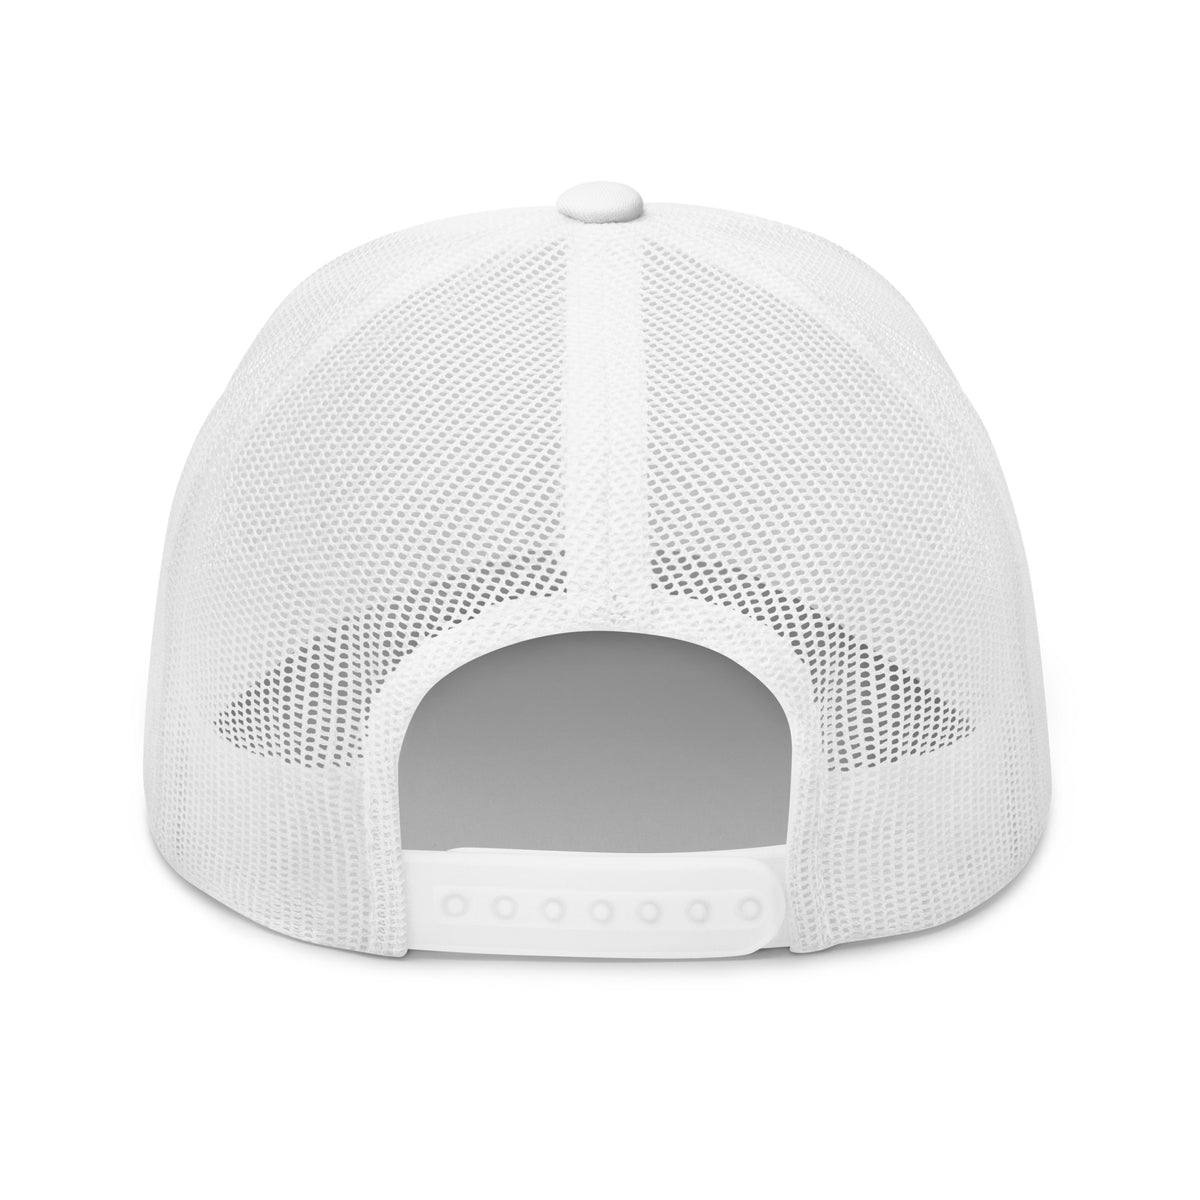 Whiteout American Flag Snapback Hat